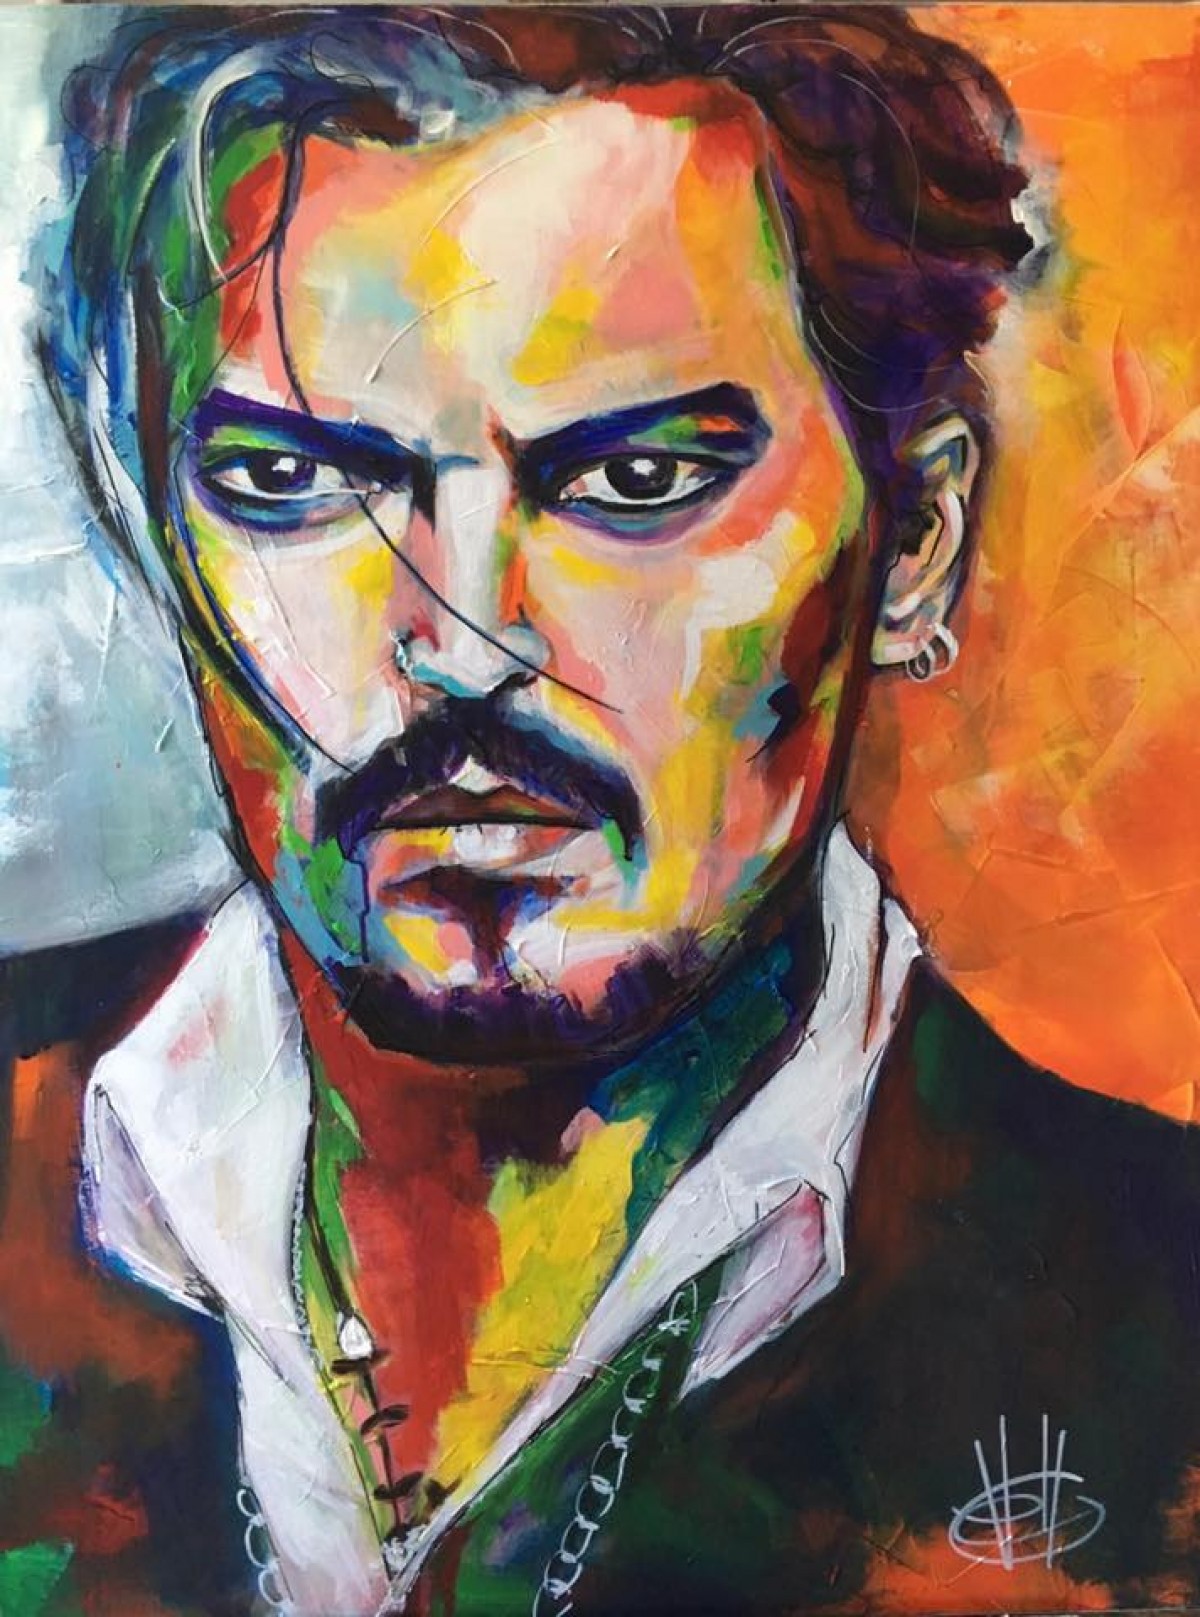 JOHNNY DEPP by pascale begin-volle, Painting | Artblr.